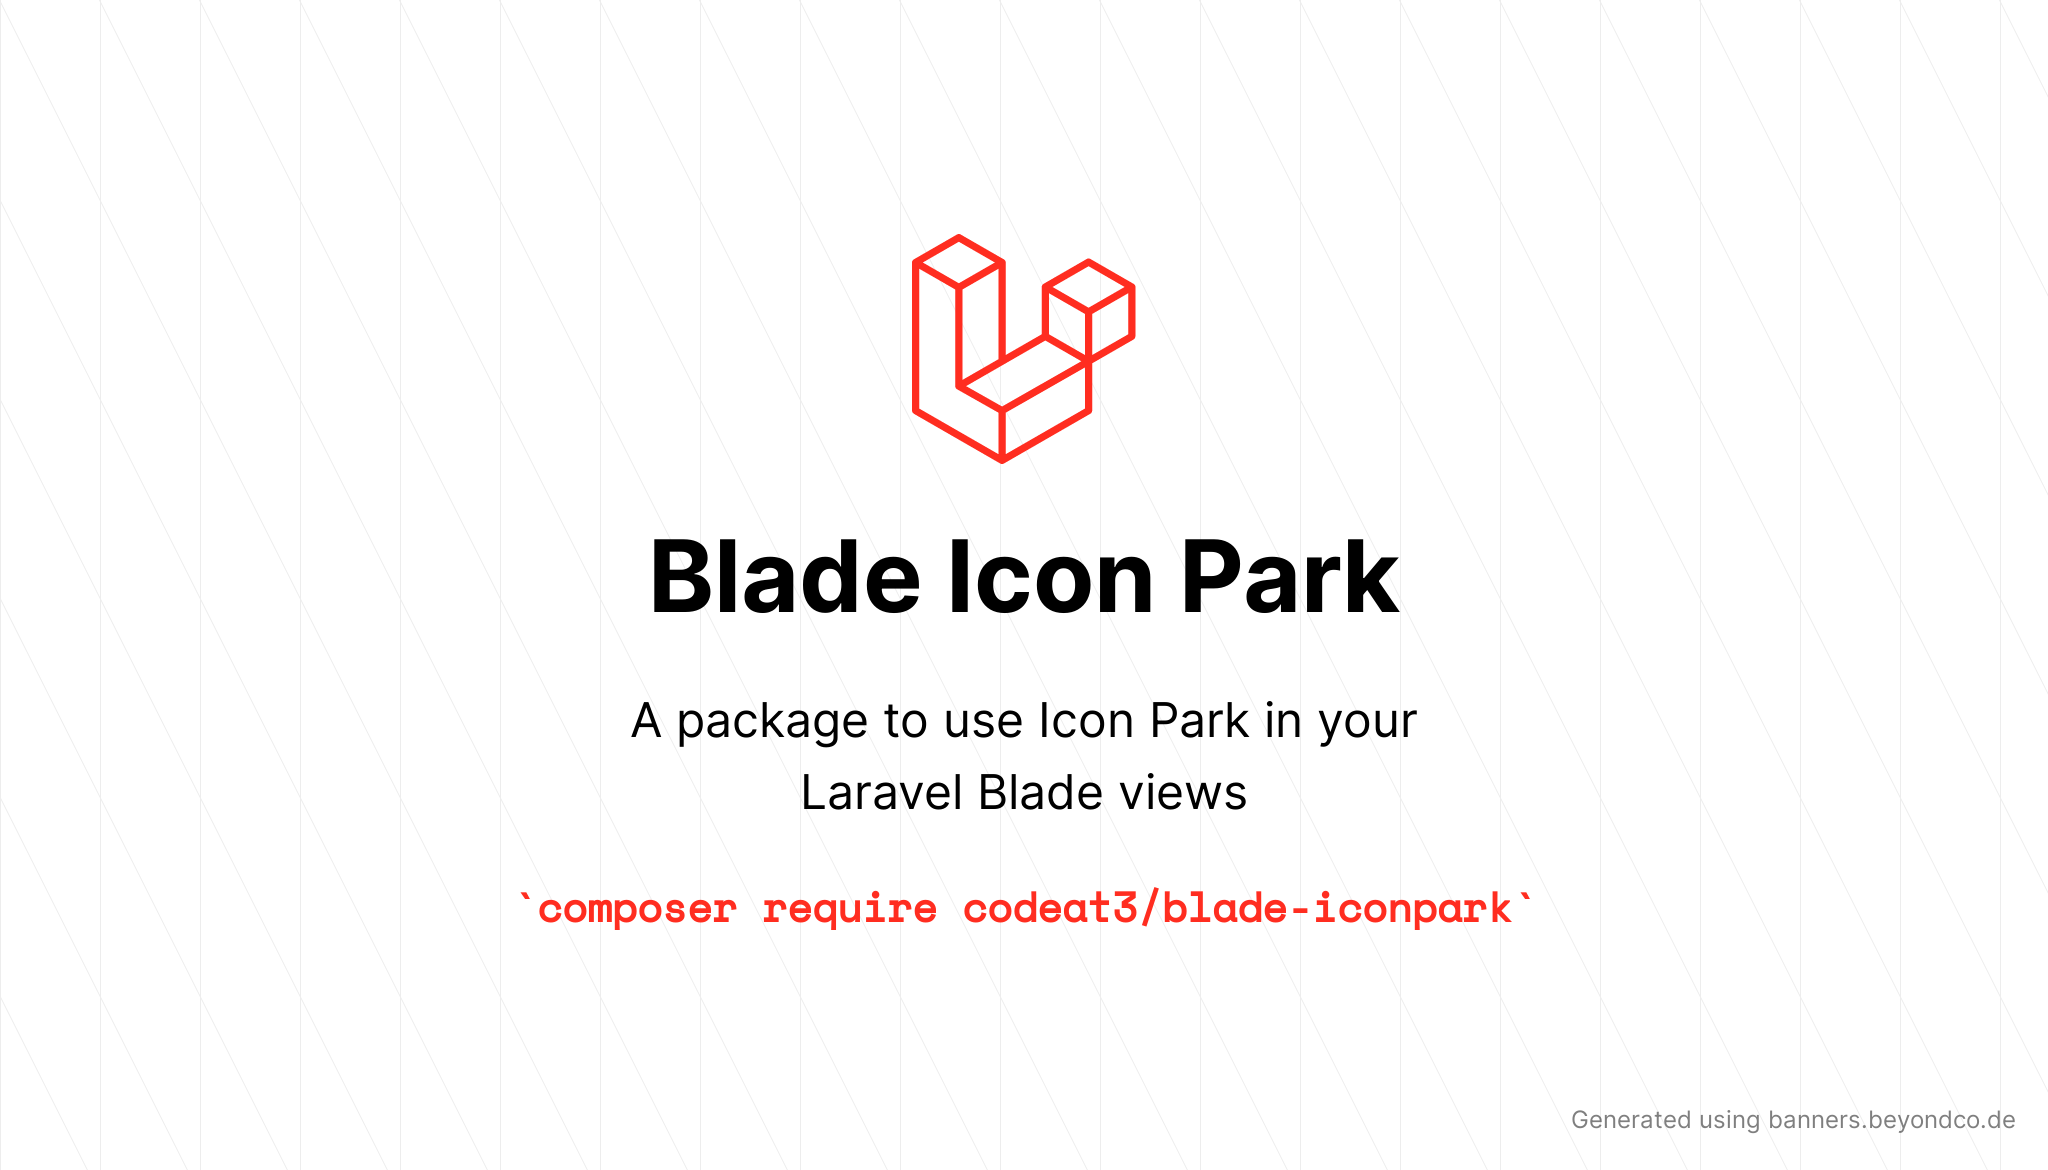 socialcard-blade-iconpark.png